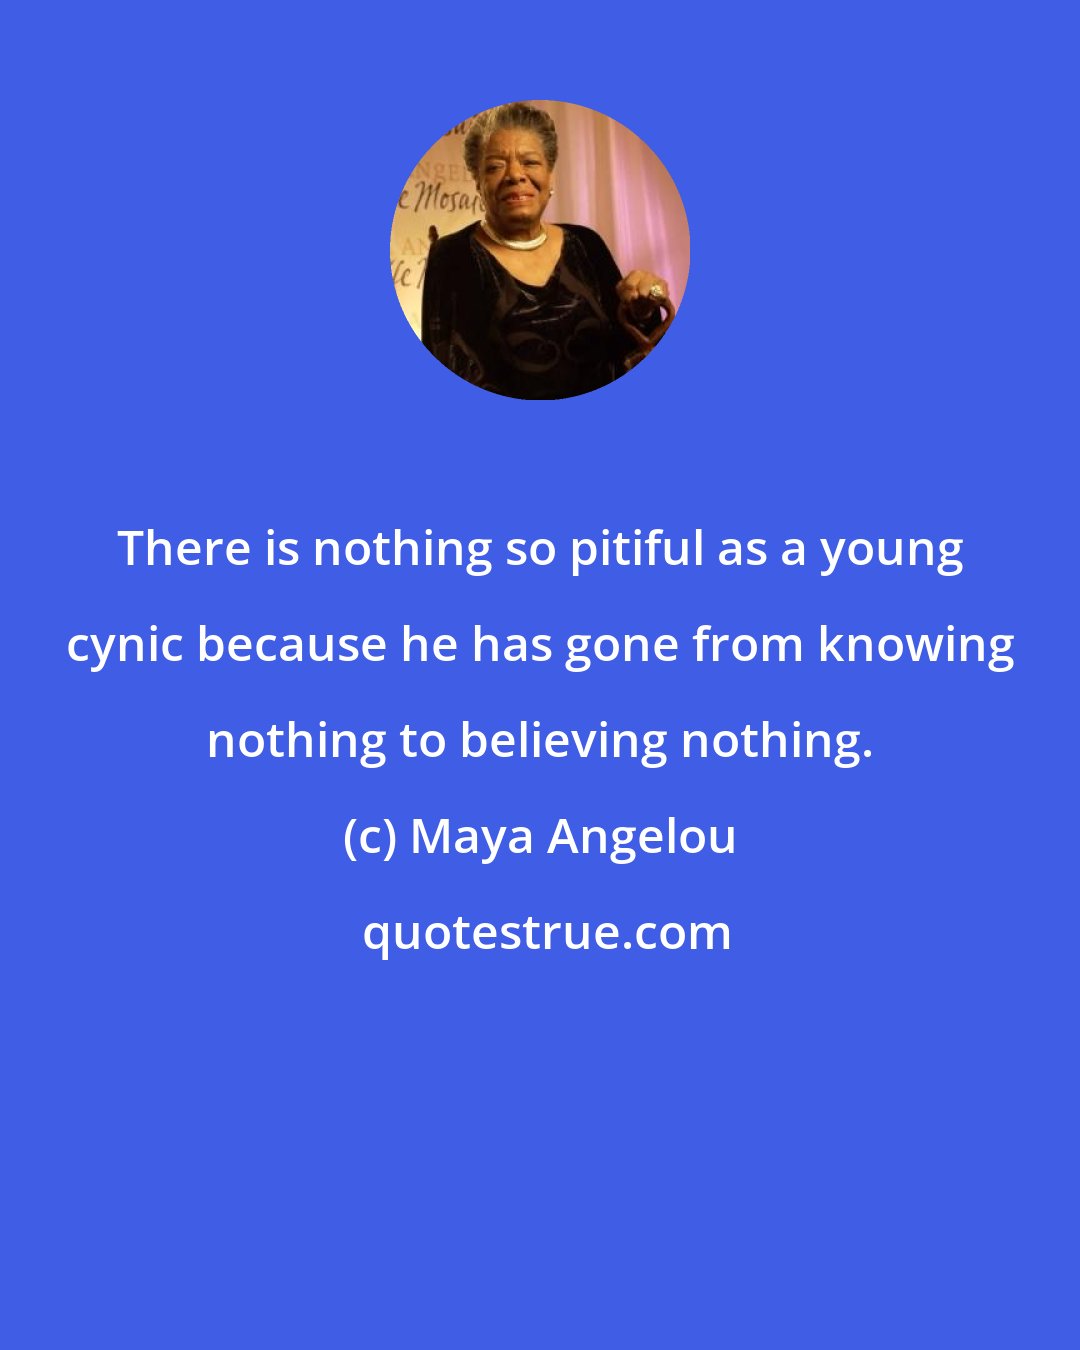 Maya Angelou: There is nothing so pitiful as a young cynic because he has gone from knowing nothing to believing nothing.